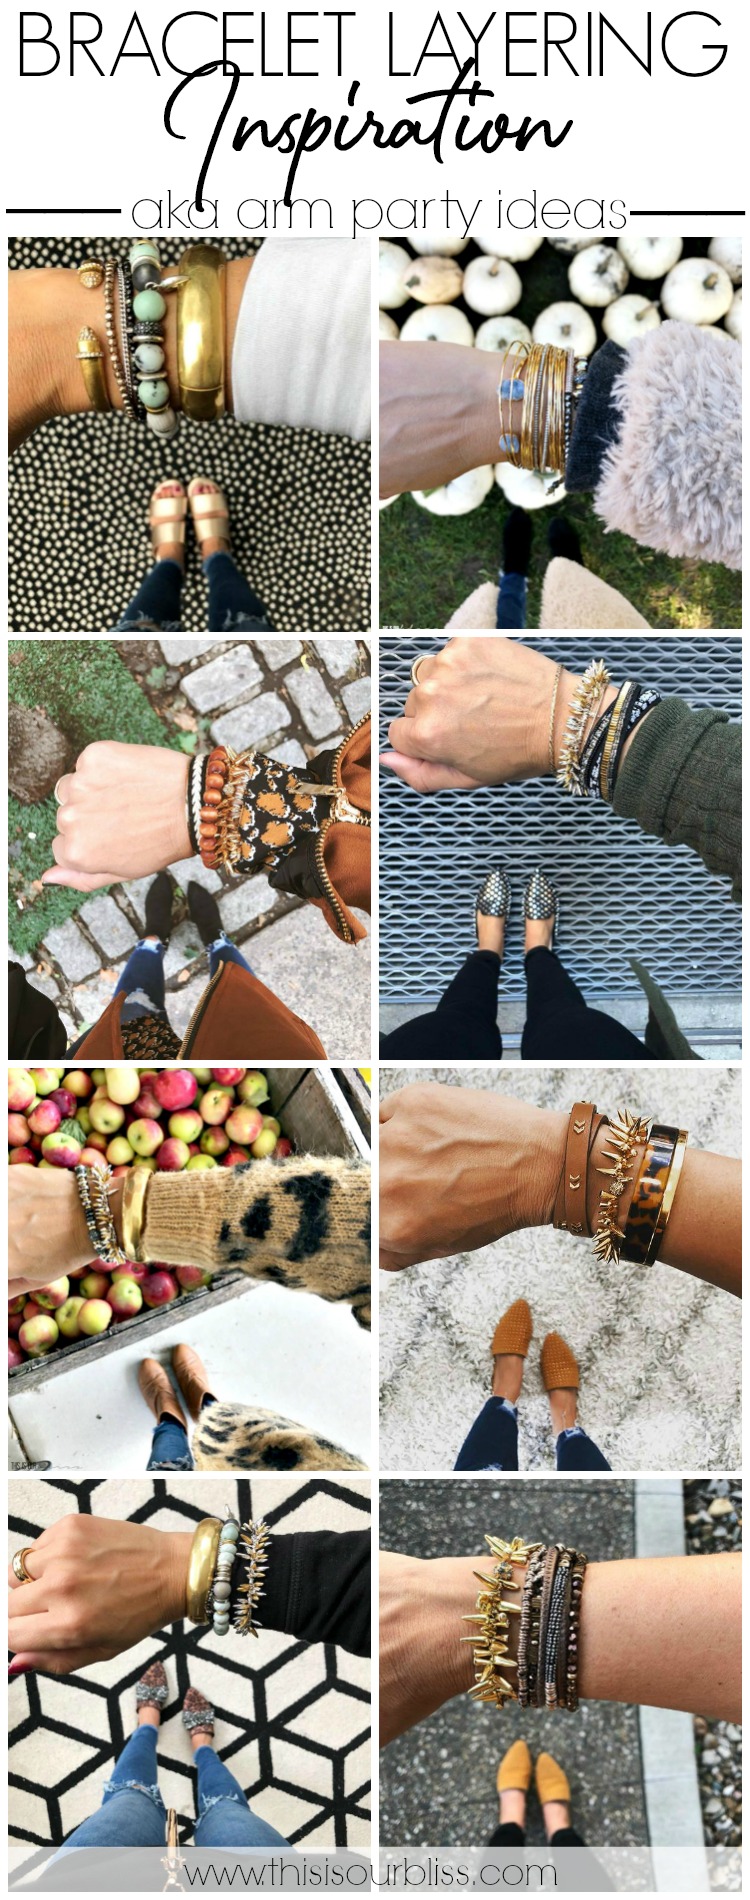 Bracelet Layering Inspiration - Arm Party Ideas - Accessory Styling - This is our Bliss